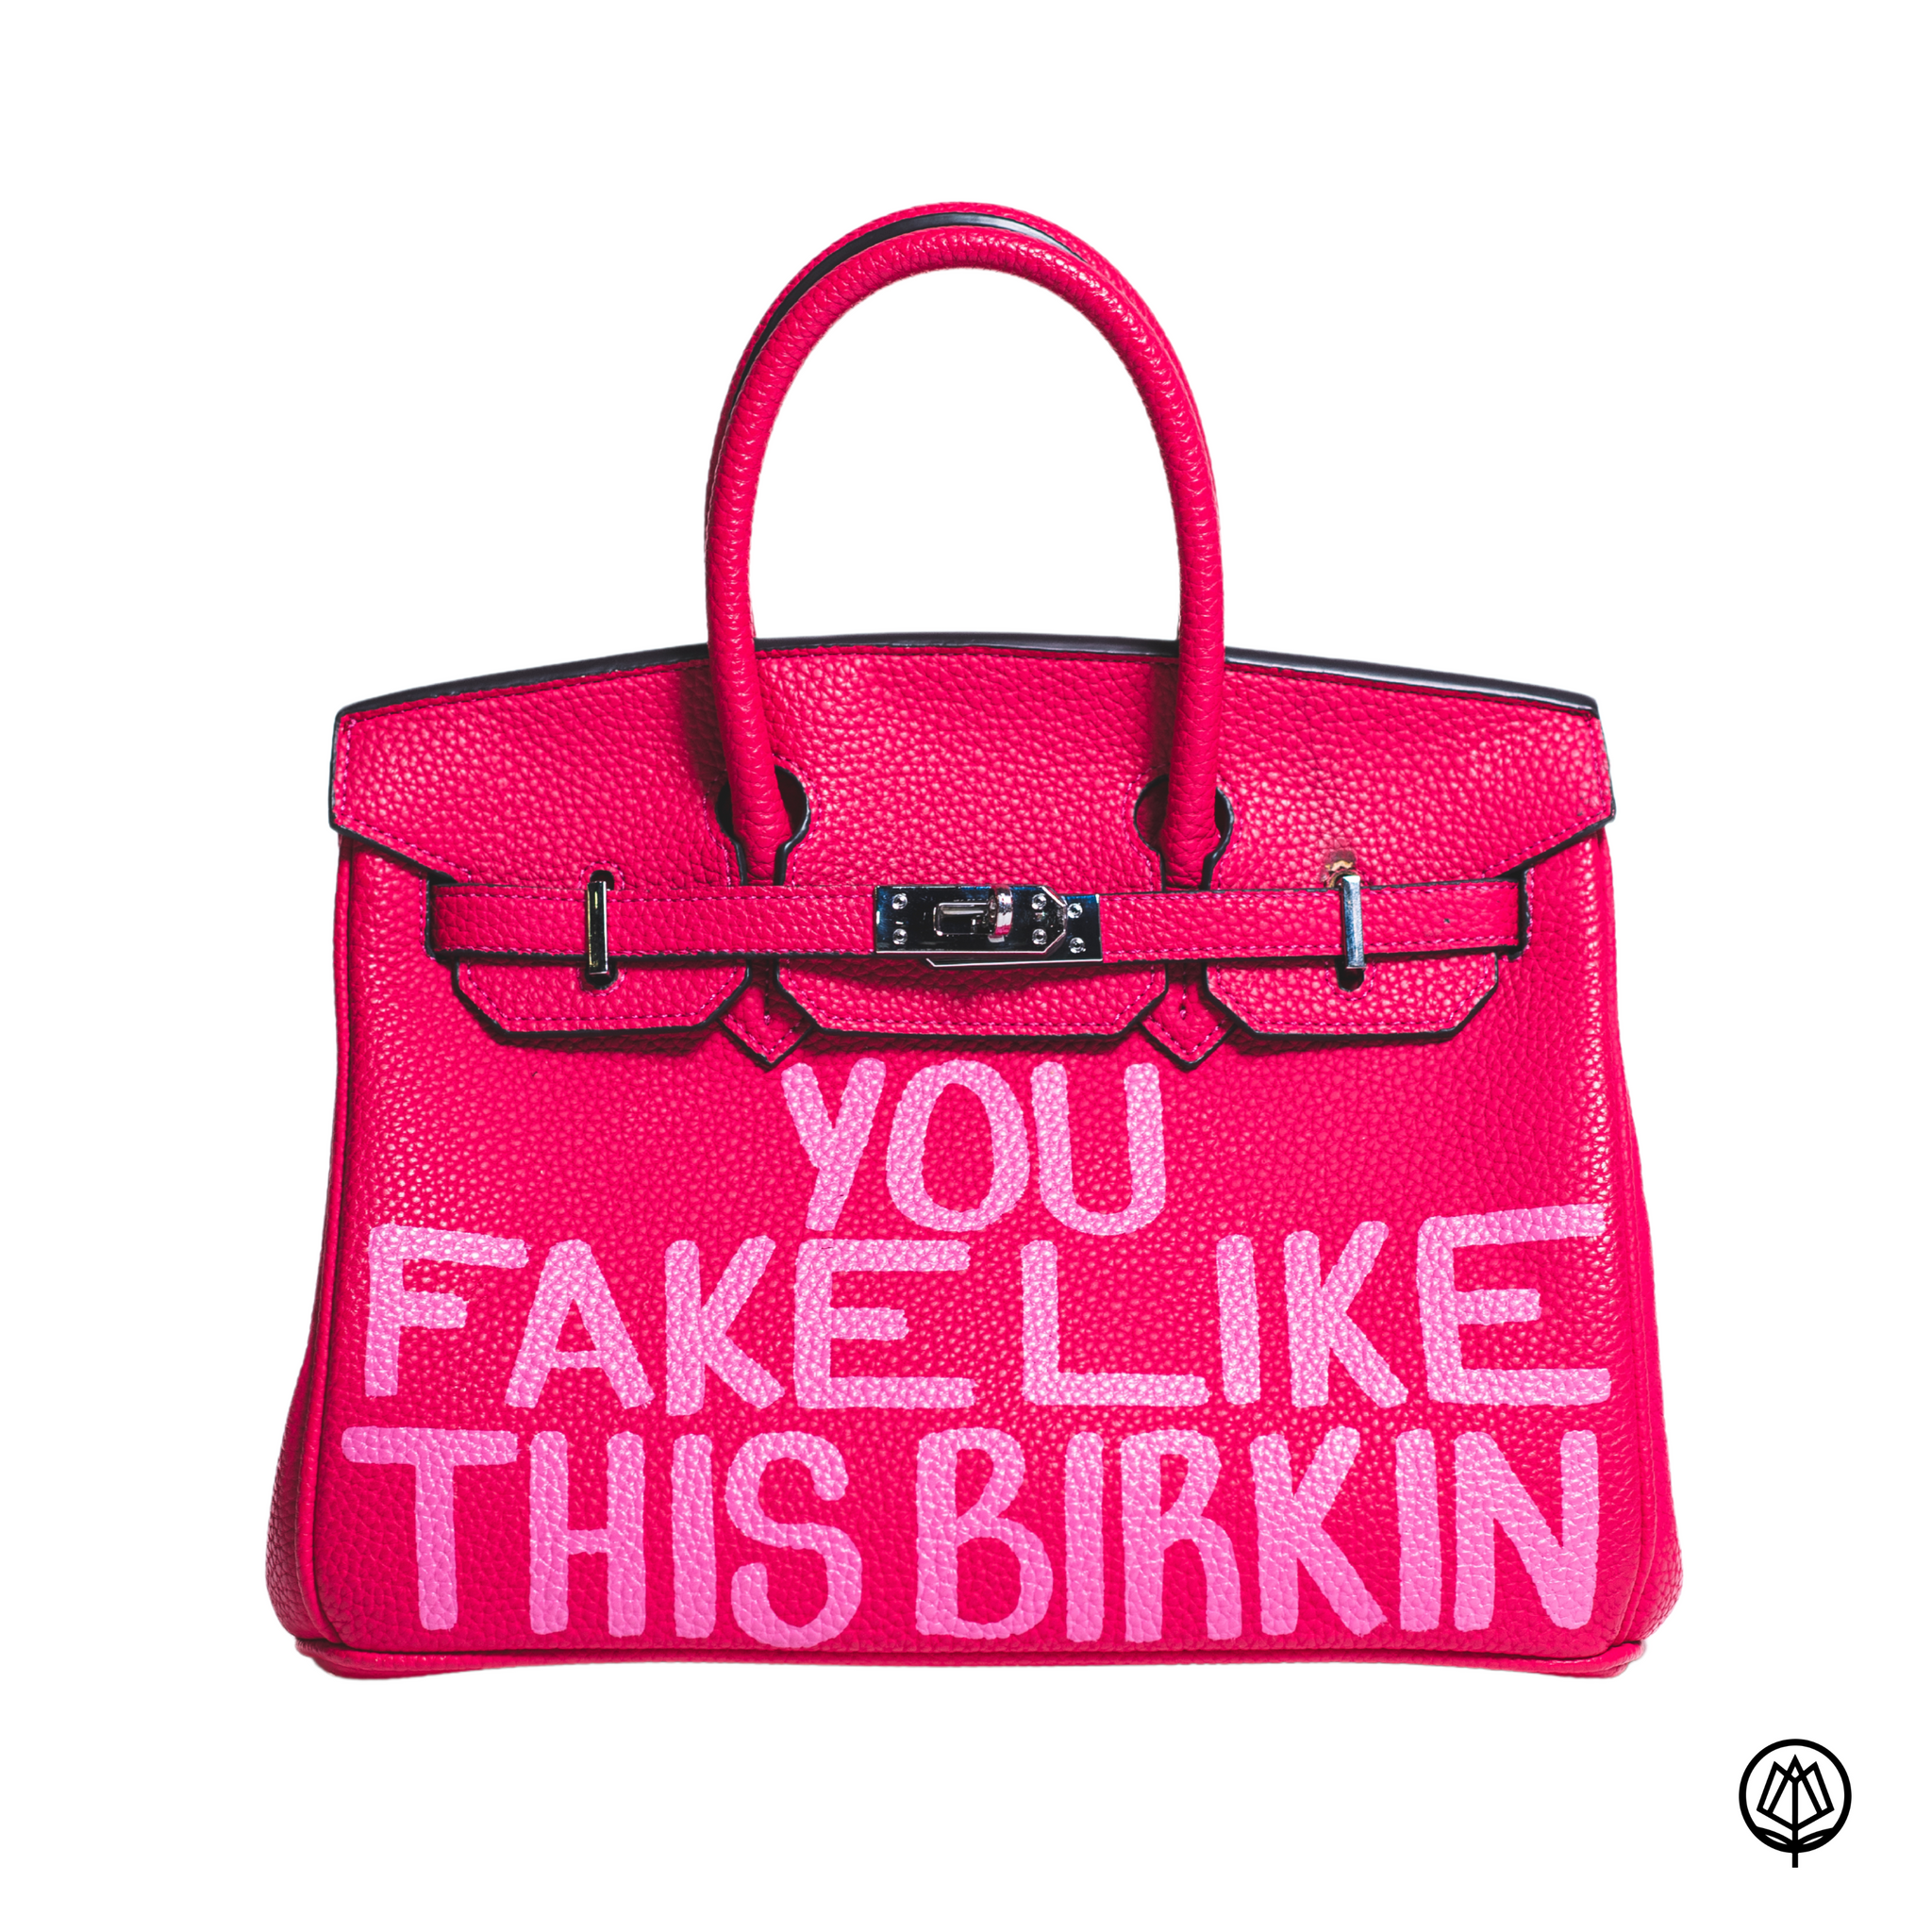 Is Amber Rose Dissing Kylie Jenner With Her 'Fake Like This Birkin' Bag?